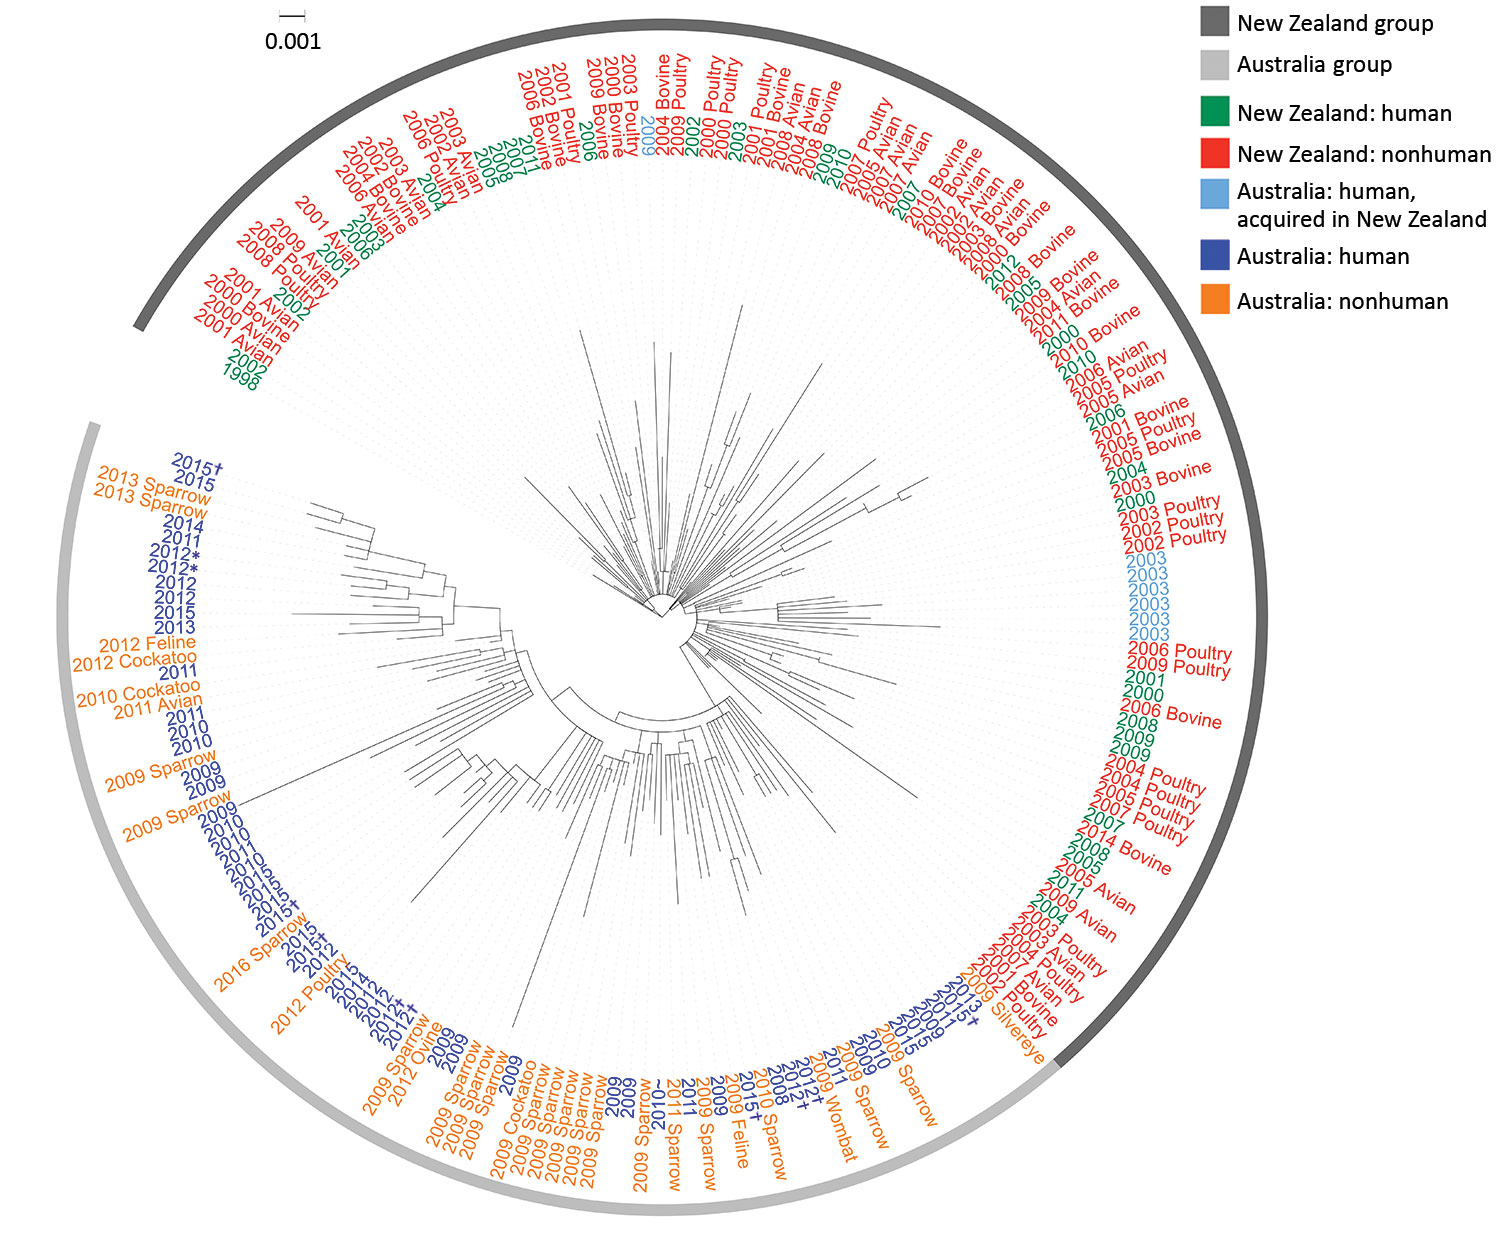 Maximum-likelihood phylogeny of 198 sequenced Salmonella enterica serovar Typhimurium definitive type 160 isolates from Australia and New Zealand and reference isolates, inferred from 2,203 core single-nucleotide polymorphisms, Australia and New Zealand. Nodes are labeled with isolate type and isolation year. All Australian isolates are from Tasmania unless specified otherwise. Figure created with iTOL (https://itol.embl.de). Scale bar indicates nucleotide substitutions per site. *Specimens from